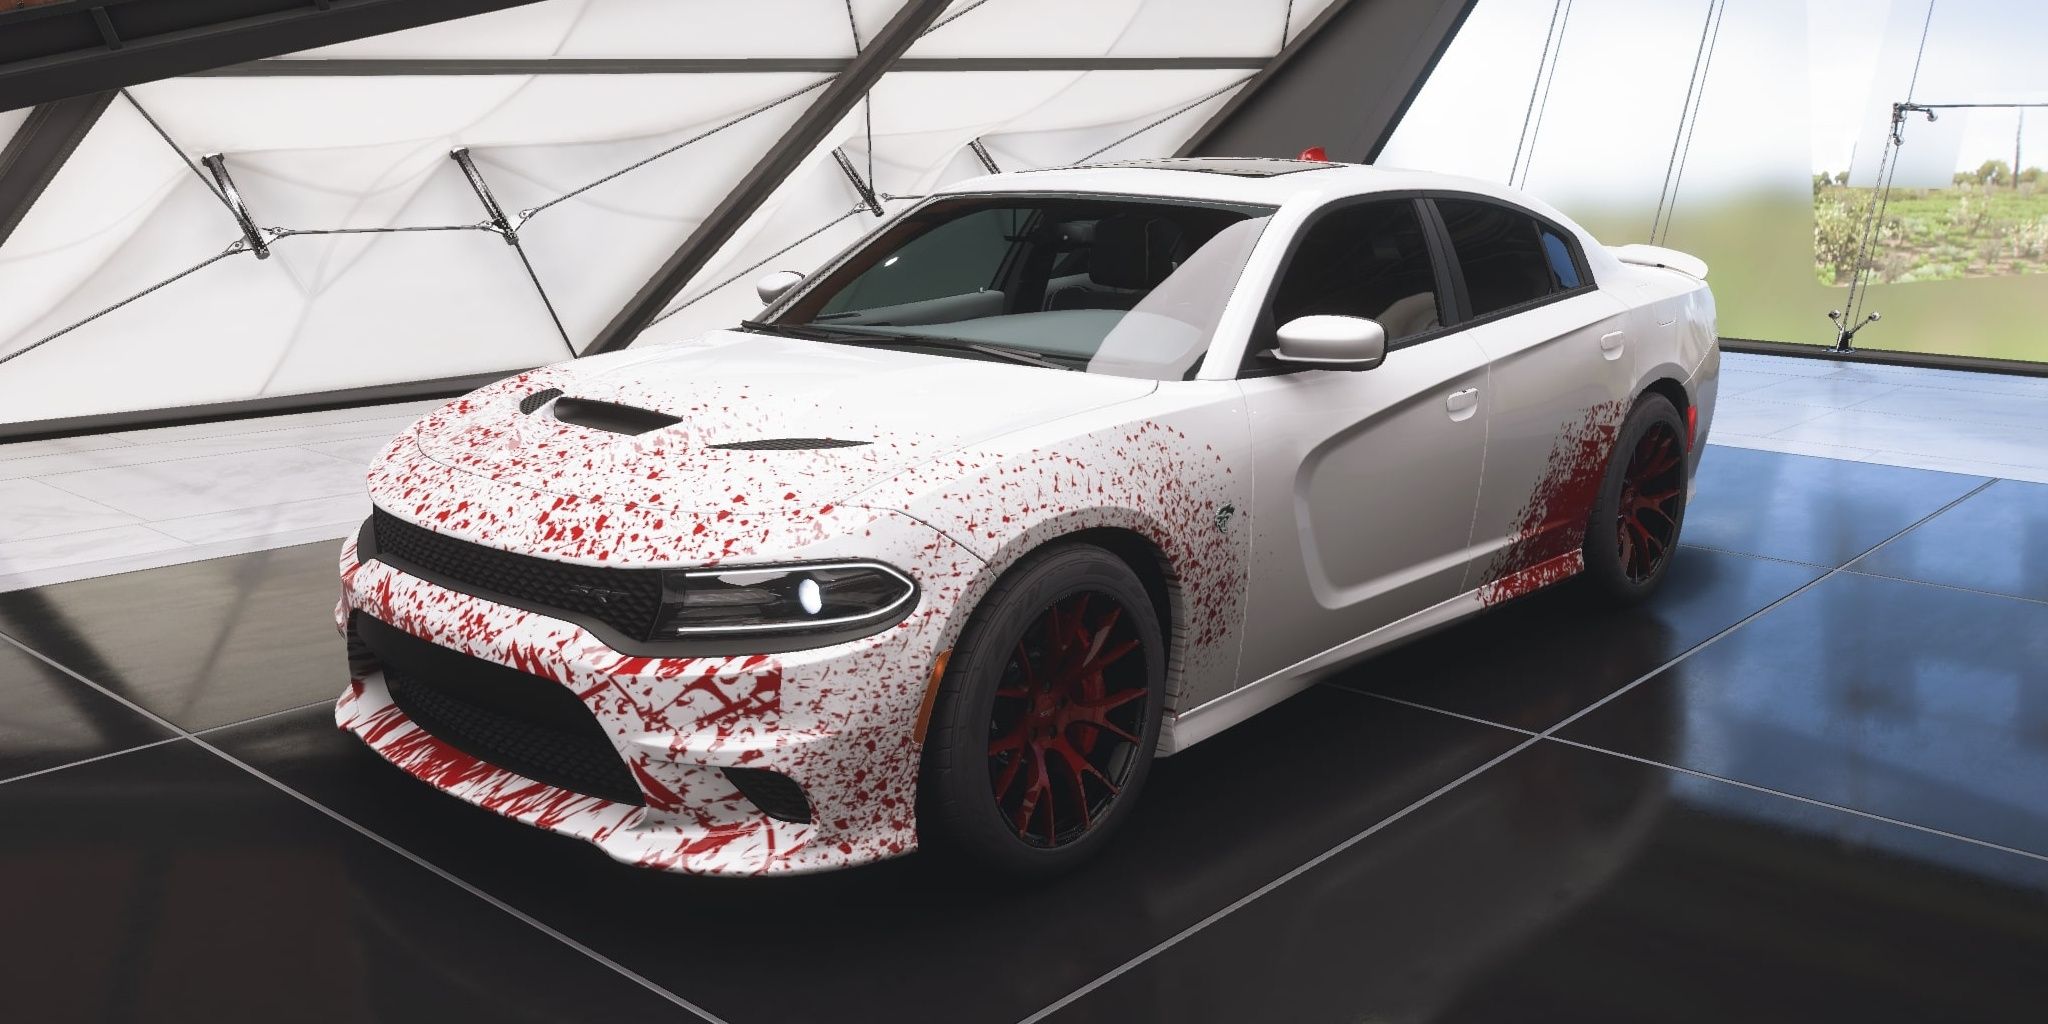 2015 Dodge Charger SRT Hellcat in Forza Horizon 5